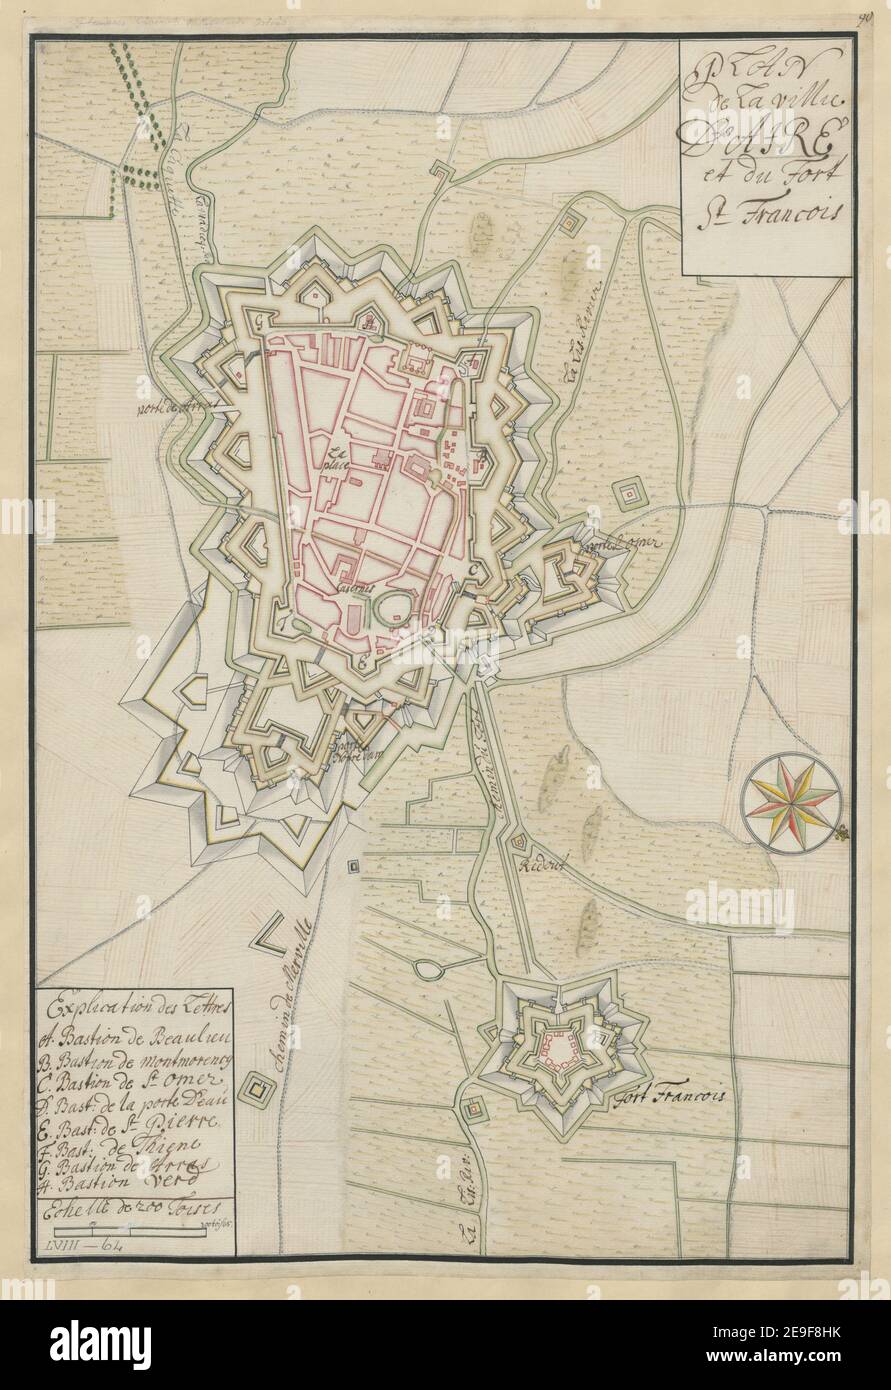 PLAN DE LA VILLE D'AIRE et du Fort St. Francois. Map information:  Title: PLAN DE LA VILLE D'AIRE et du Fort St. Francois. 58.64. Date of publication: [about 1720]  Item type: 1 map Medium: ink and wash Dimensions: 50.3 x 33.5 cm  Former owner: George III, King of Great Britain, 1738-1820 Stock Photo